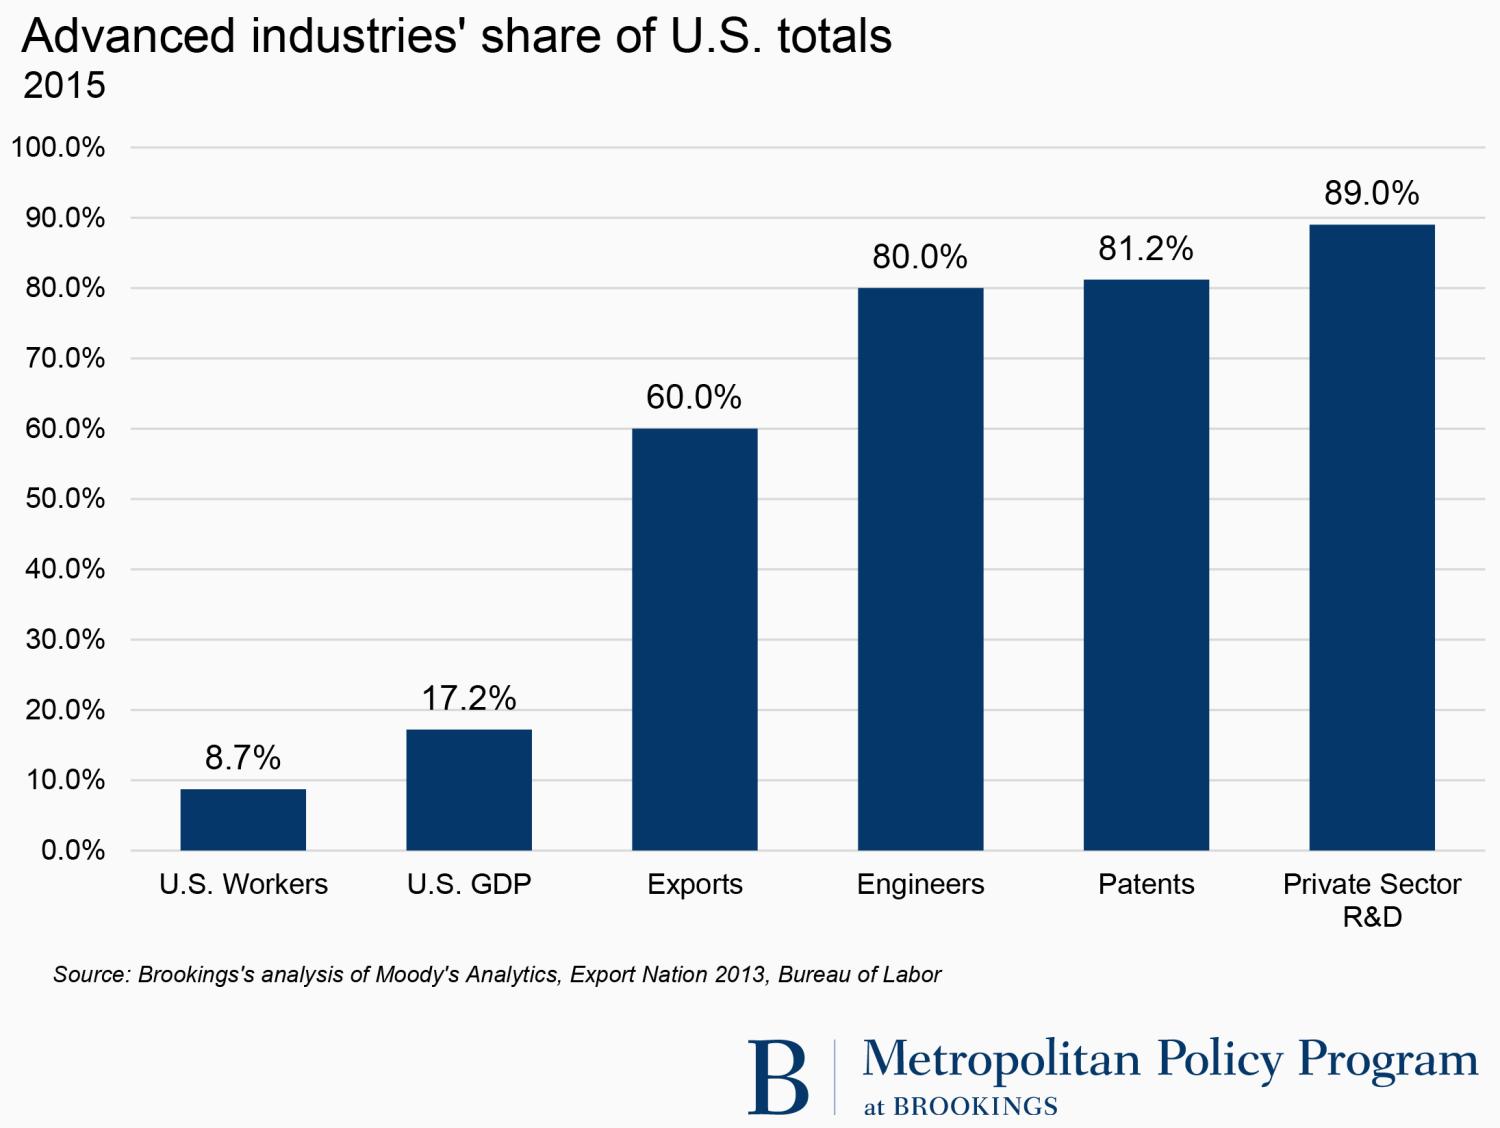 Advanced industries' share of U.S. totals